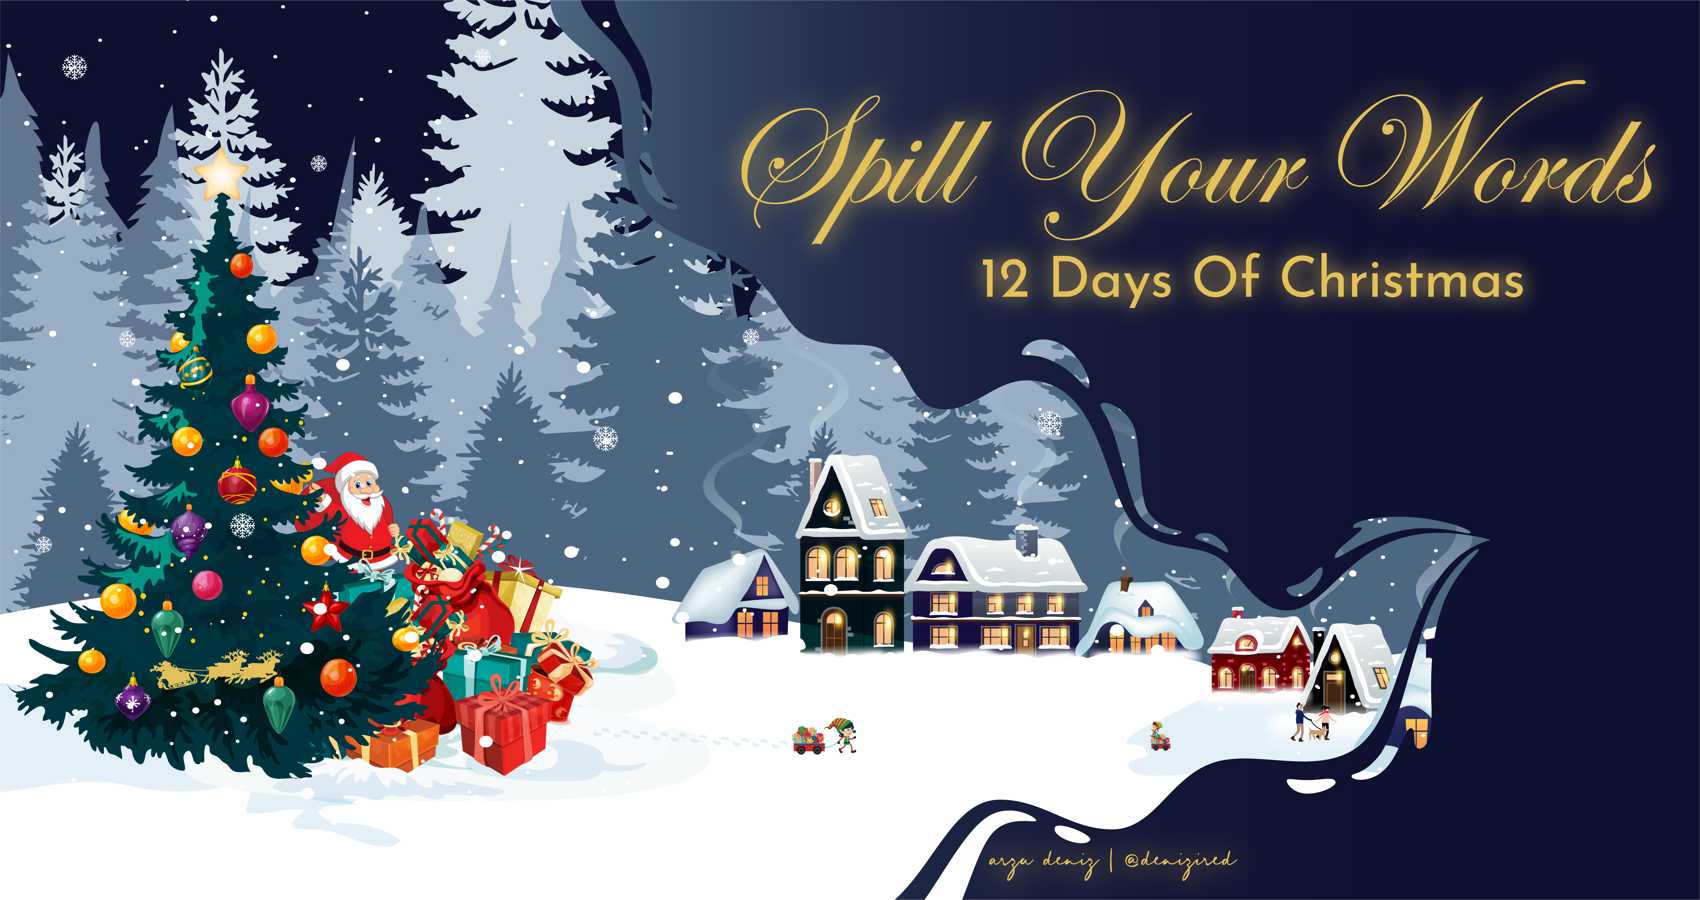 12 Days of Christmas submission at Spillwords.com